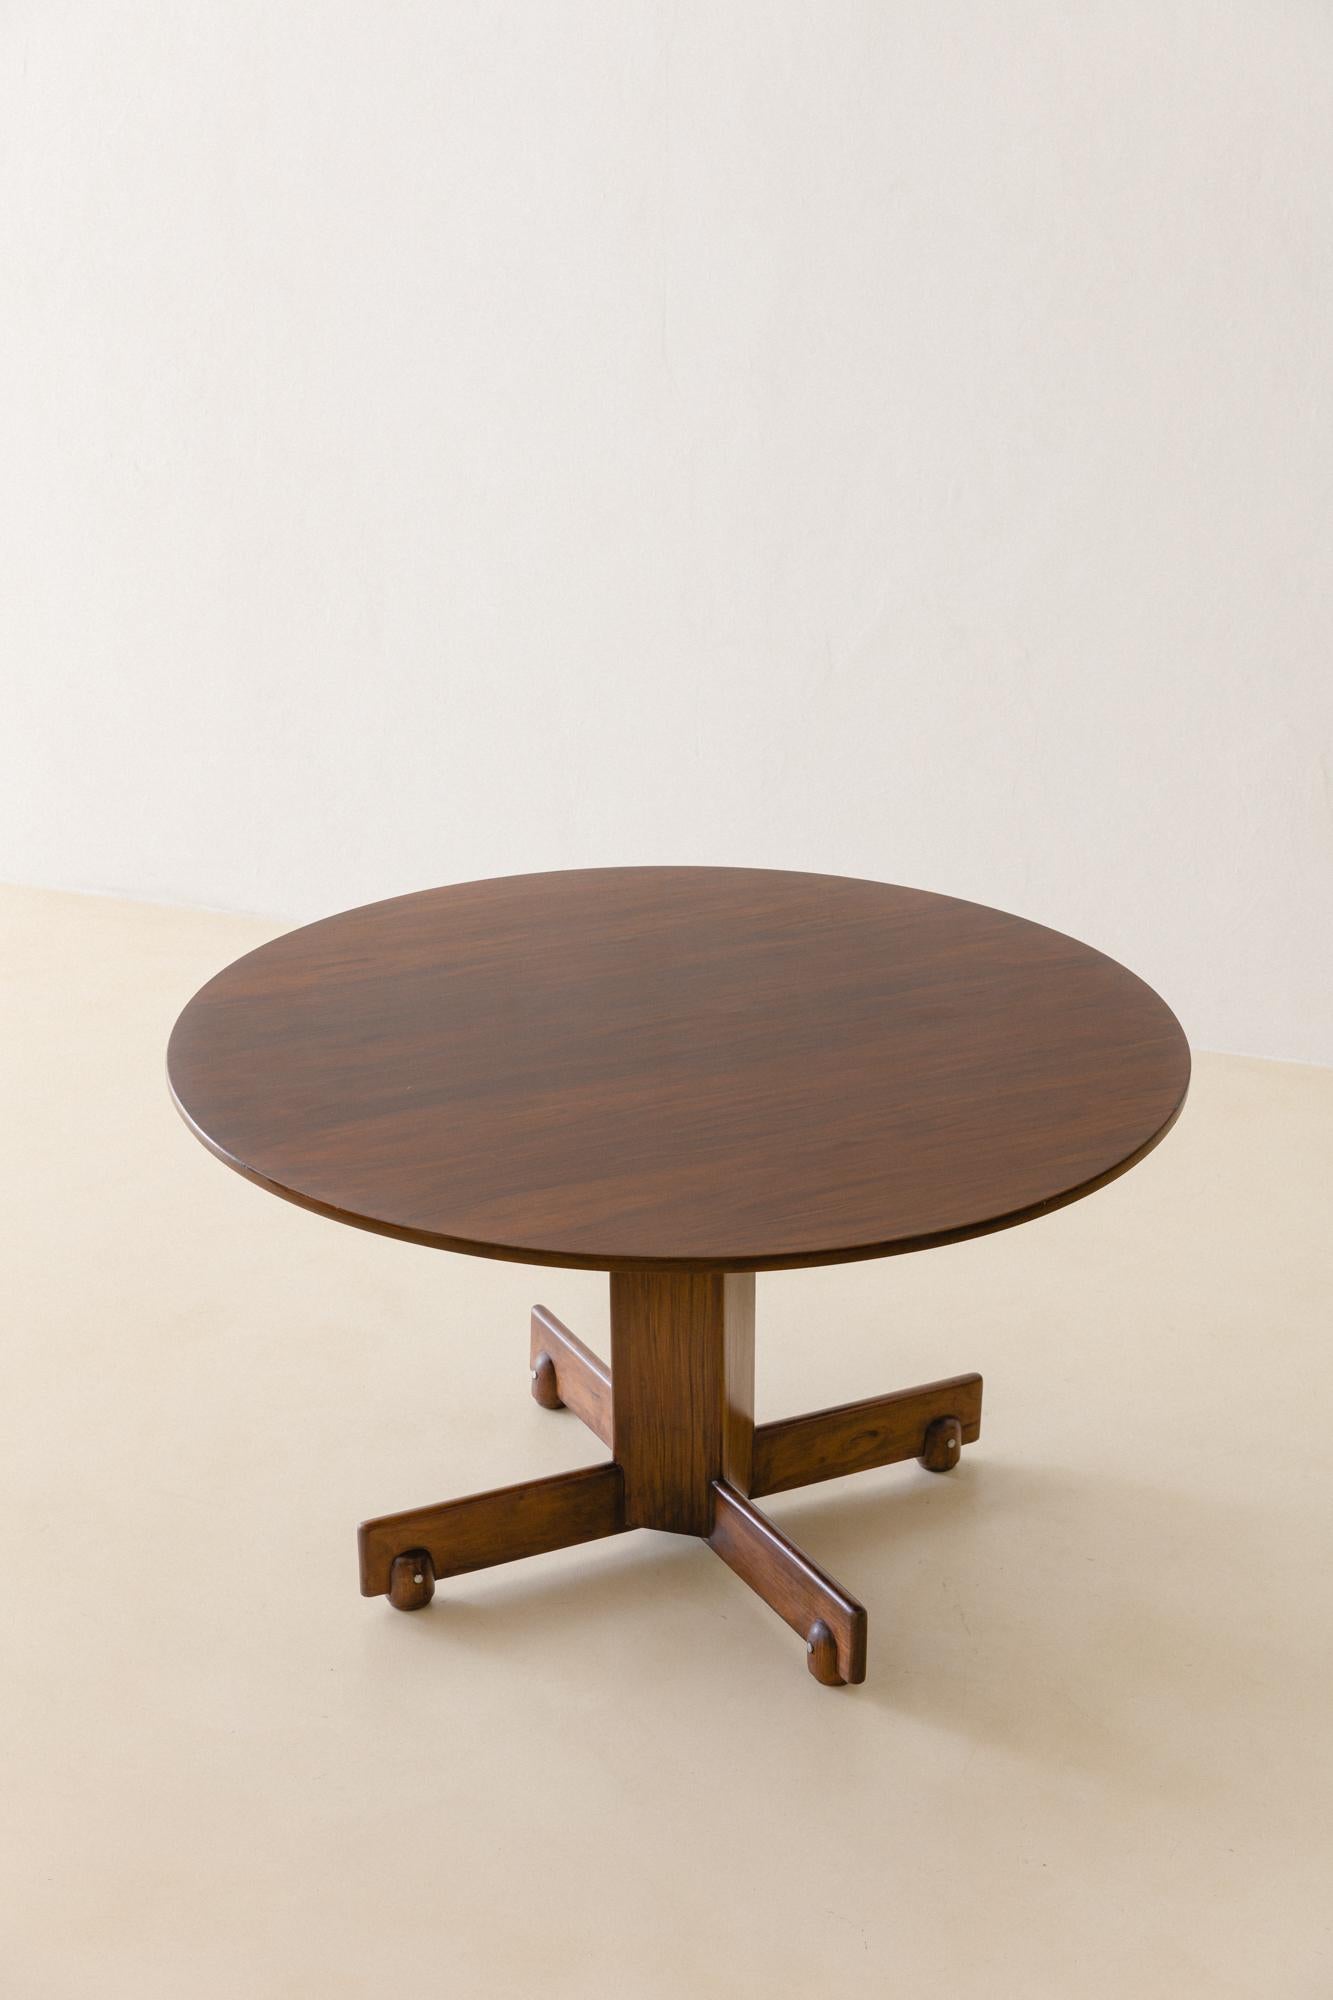 The Alex table is a rounded table made in solid Rosewood (Jacaranda), with both feet and top cross-shaped. 

Designed in 1960 by Sergio Rodrigues (1927-2014), this modern dining table features very well-built fittings, as the cross support for the